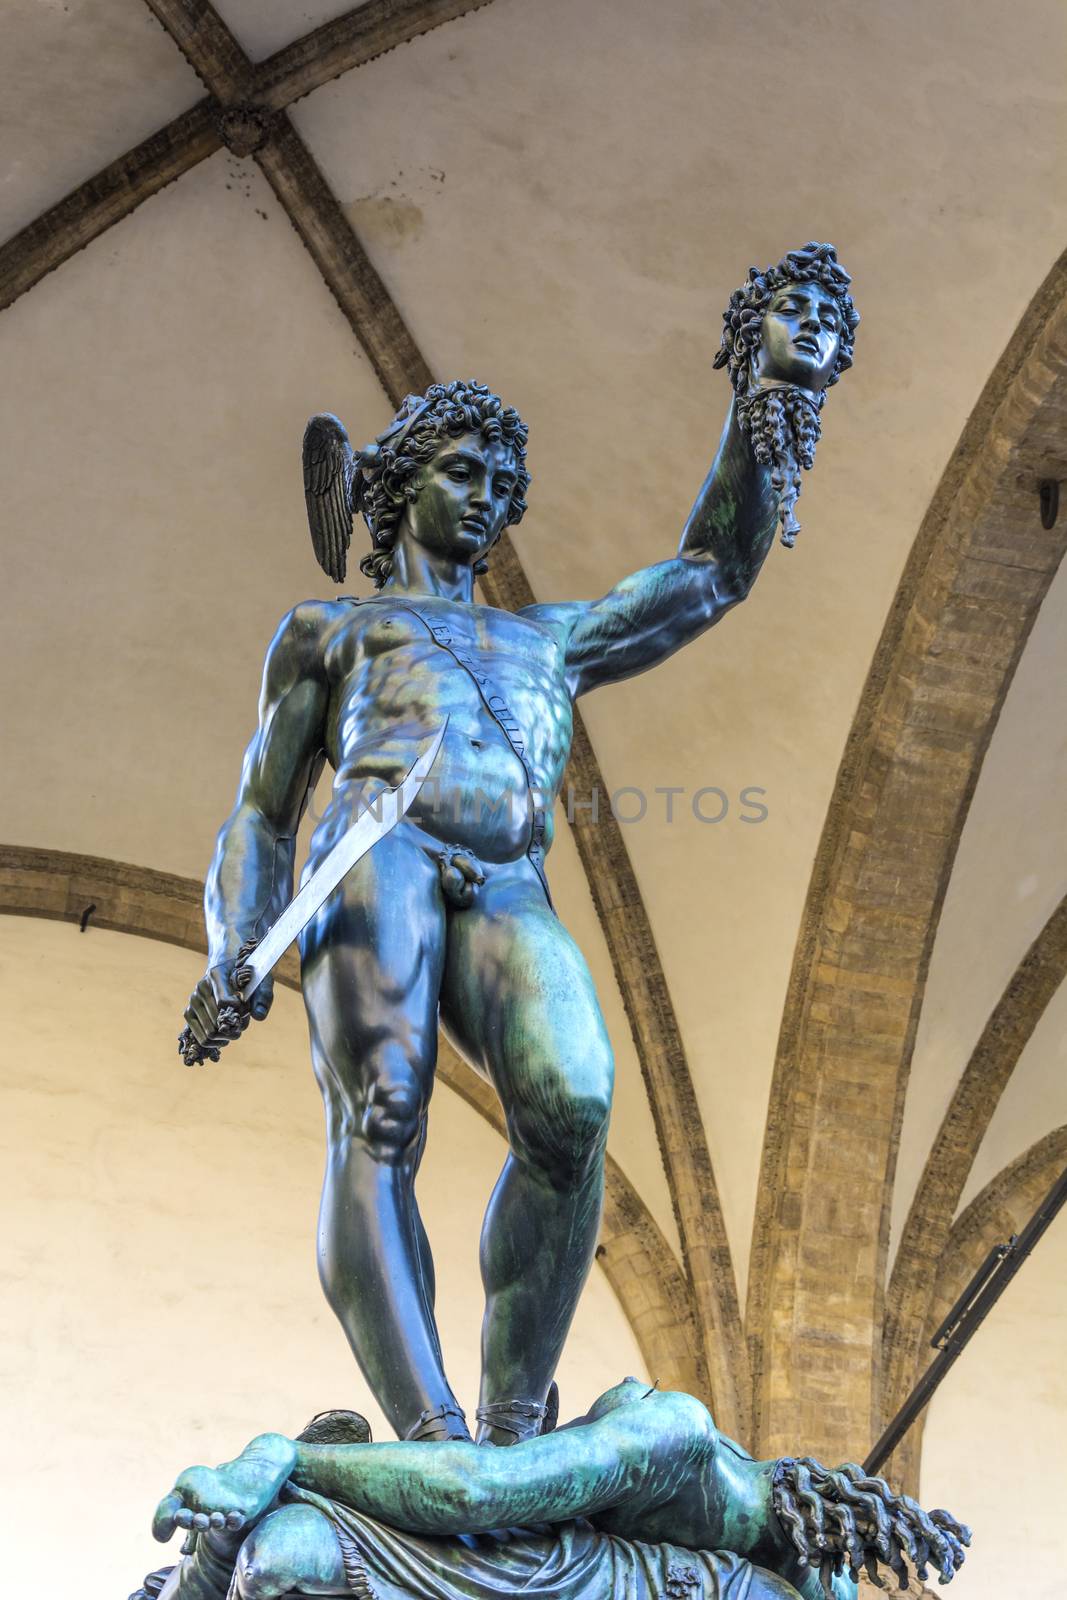 Perseus with the Head of Medusa is a bronze sculpture made by Benvenuto Cellini in 1545. The subject matter of the work is the mythological story of Perseus beheading Medusa, a hideous woman-faced Gorgon whose hair was turned to snakes and anyone that looked at her was turned to stone.